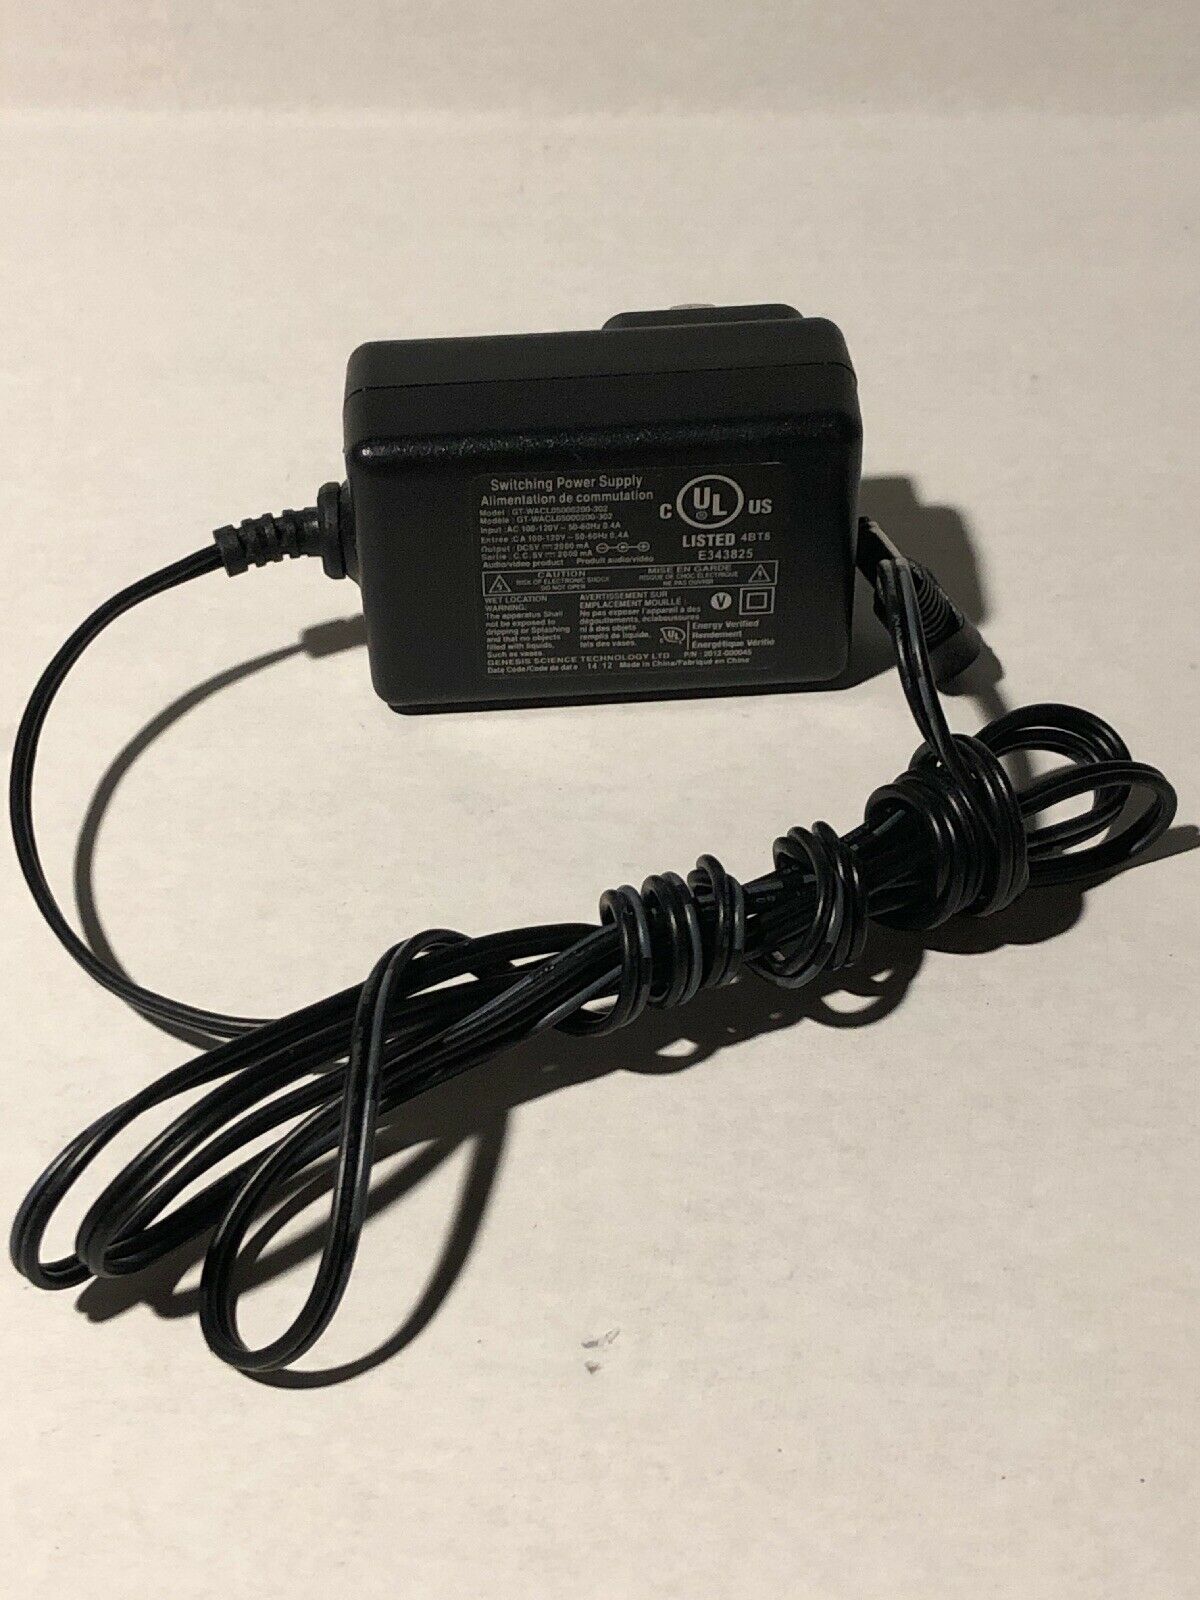 NEW 5VDC 2A Switching Power Supply GT-WACL05000200-302 AC Adapter Adaptor